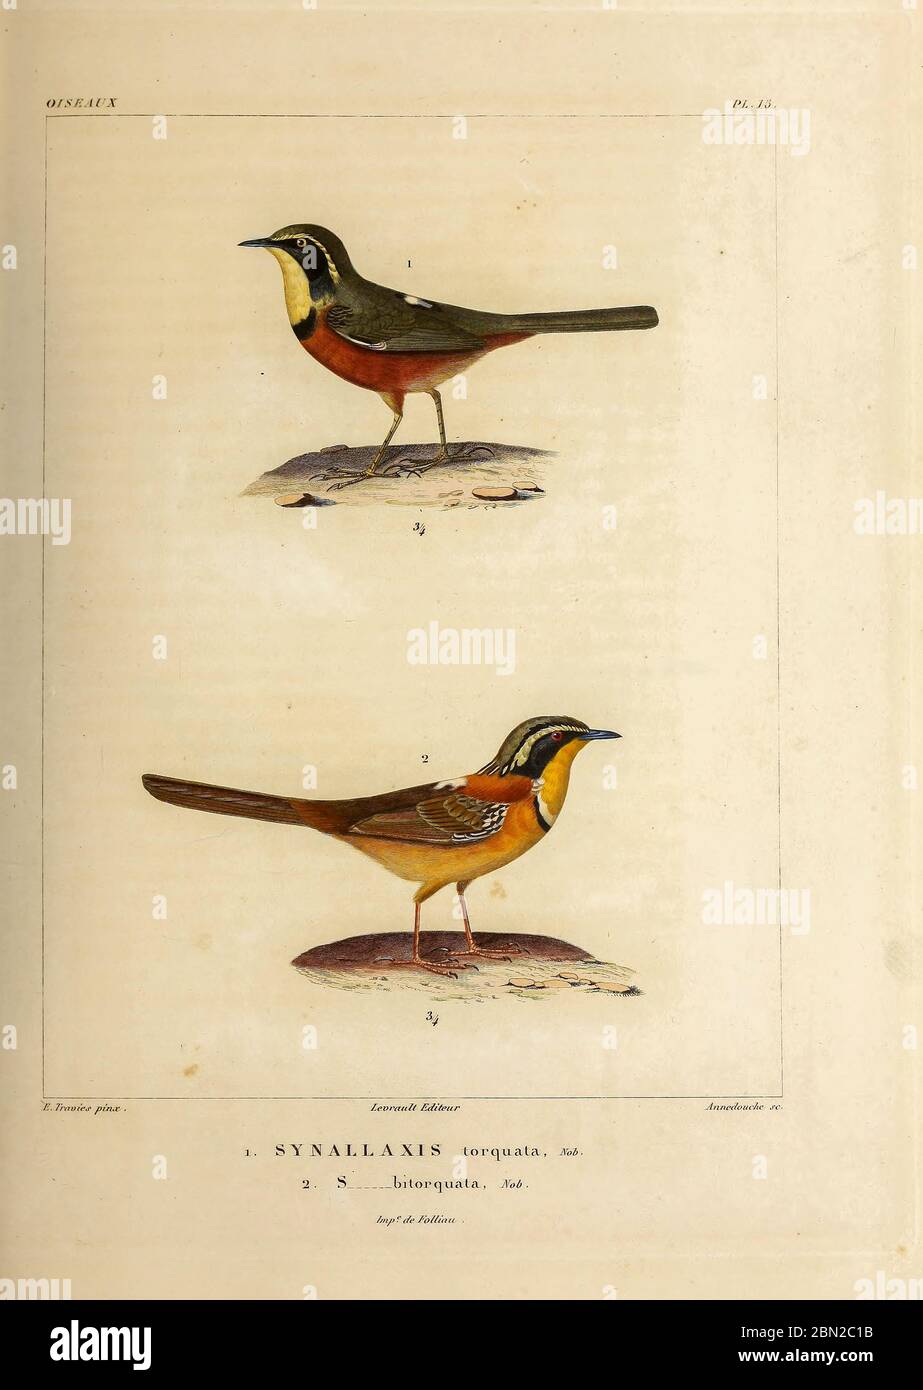 hand coloured sketch Top: olive-crowned crescentchest (Melanopareia maximiliani [Here as Synallaxis torquata]) Bottom: double-collared crescentchest (Melanopareia bitorquata [Here as Synallaxis bitorquata]) From the book 'Voyage dans l'Amérique Méridionale' [Journey to South America: (Brazil, the eastern republic of Uruguay, the Argentine Republic, Patagonia, the republic of Chile, the republic of Bolivia, the republic of Peru), executed during the years 1826 - 1833] 4th volume Part 3 By: Orbigny, Alcide Dessalines d', d'Orbigny, 1802-1857; Montagne, Jean François Camille, 1784-1866; Martius, Stock Photo